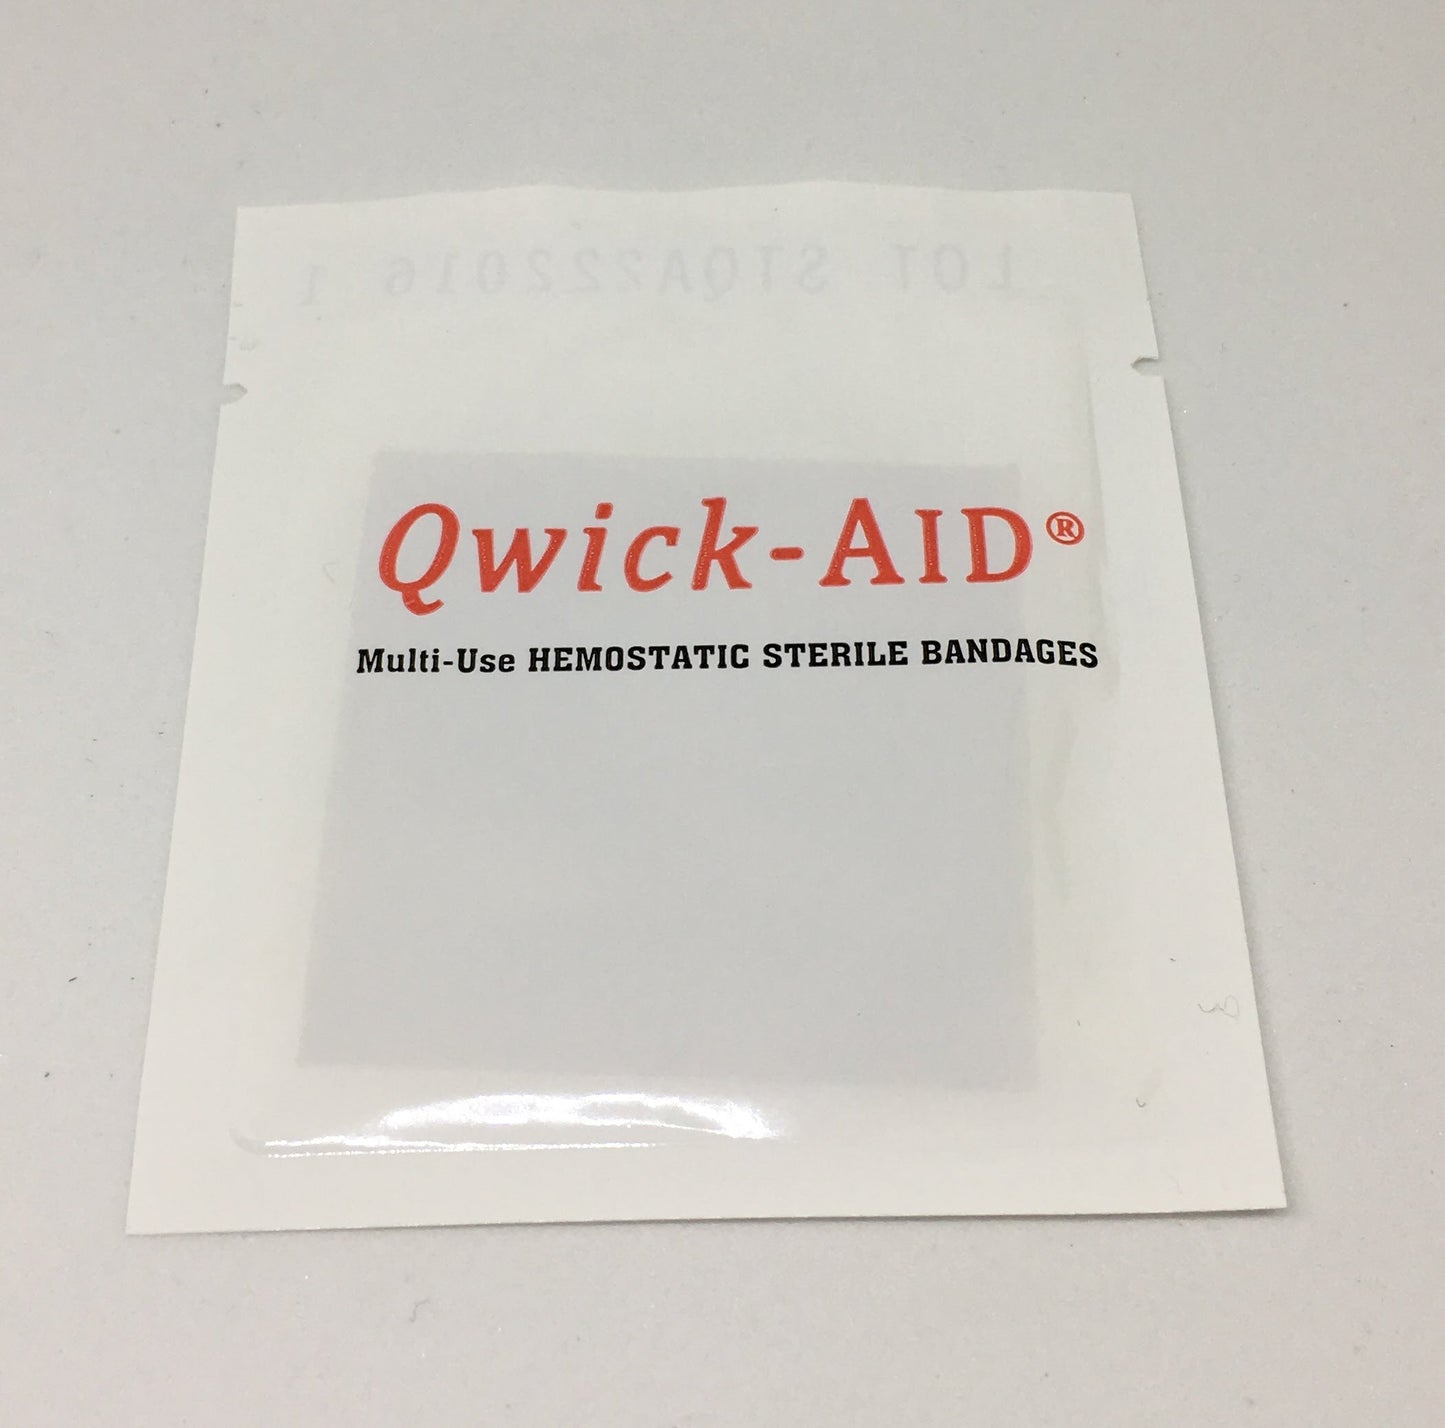 QWICK-AID  *Back in stock March 5th* (Stops Bleeding in Seconds)